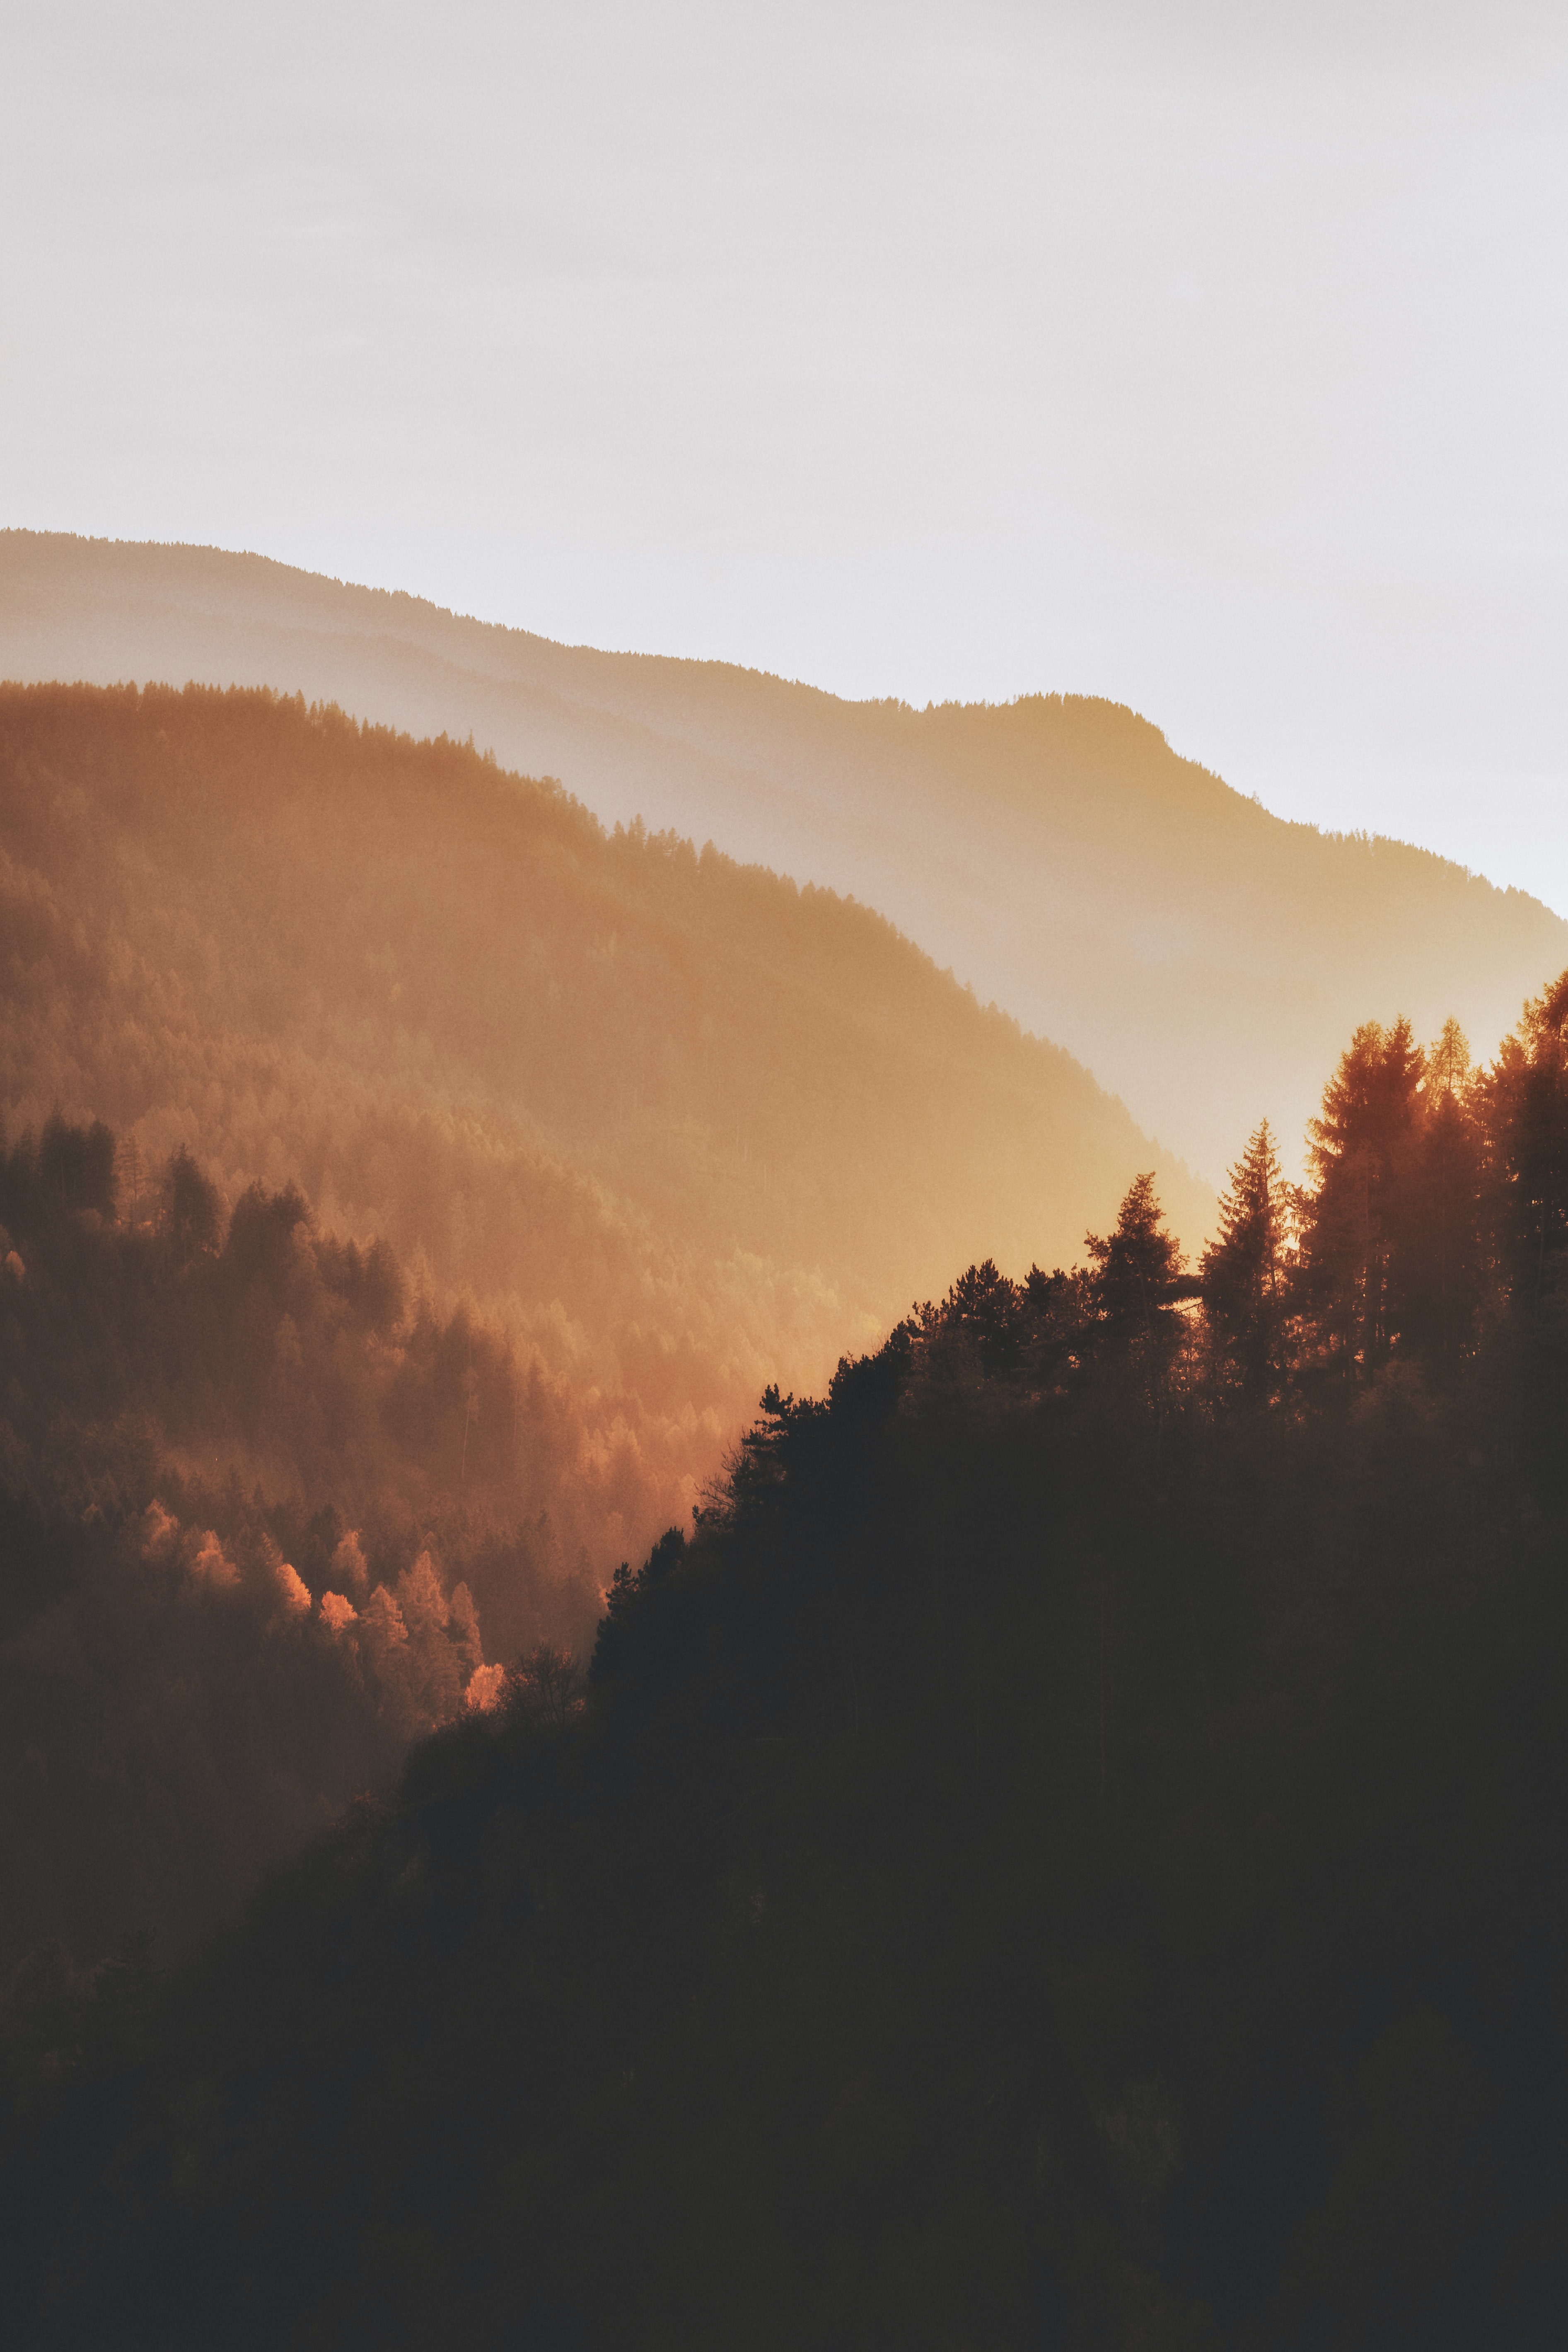 sunset, nature, trees, forest, hills